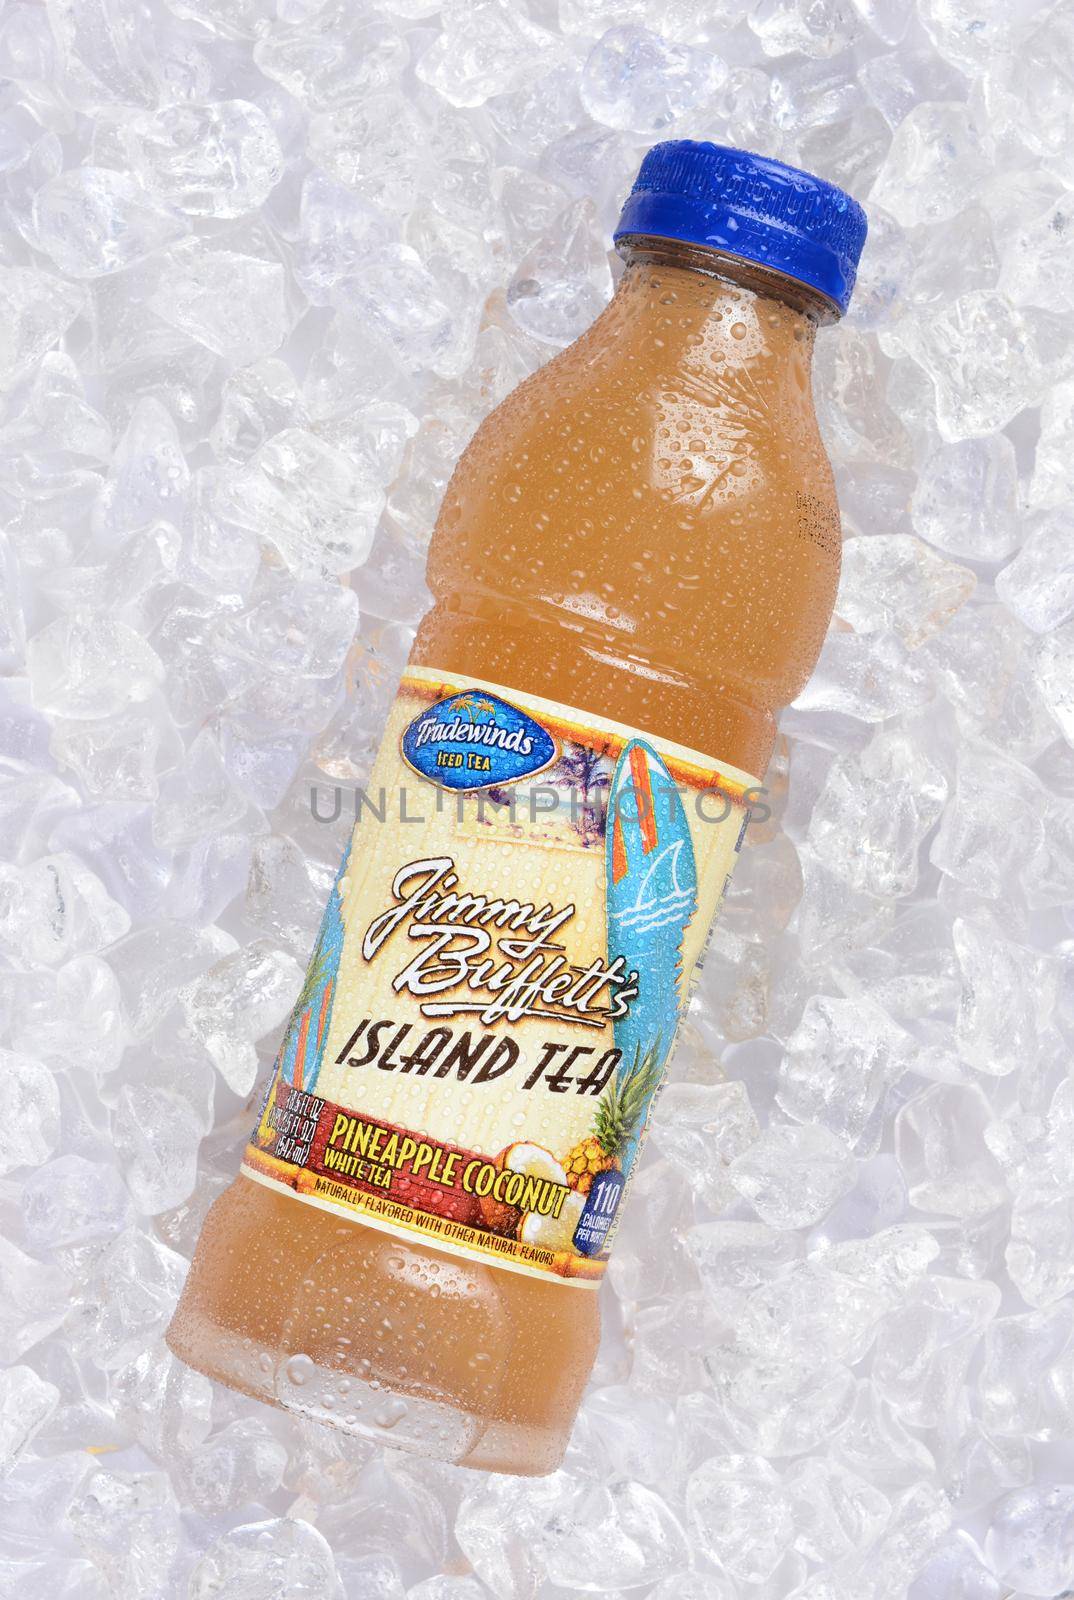 IRVINE, CA - JULY 23, 2015: A bottle of Jimmy Buffett Island Tea on ice. Tradewinds Ice Teas partenered with the singer to make a line of drinks with blends of tropical fruit flavor and iced tea.